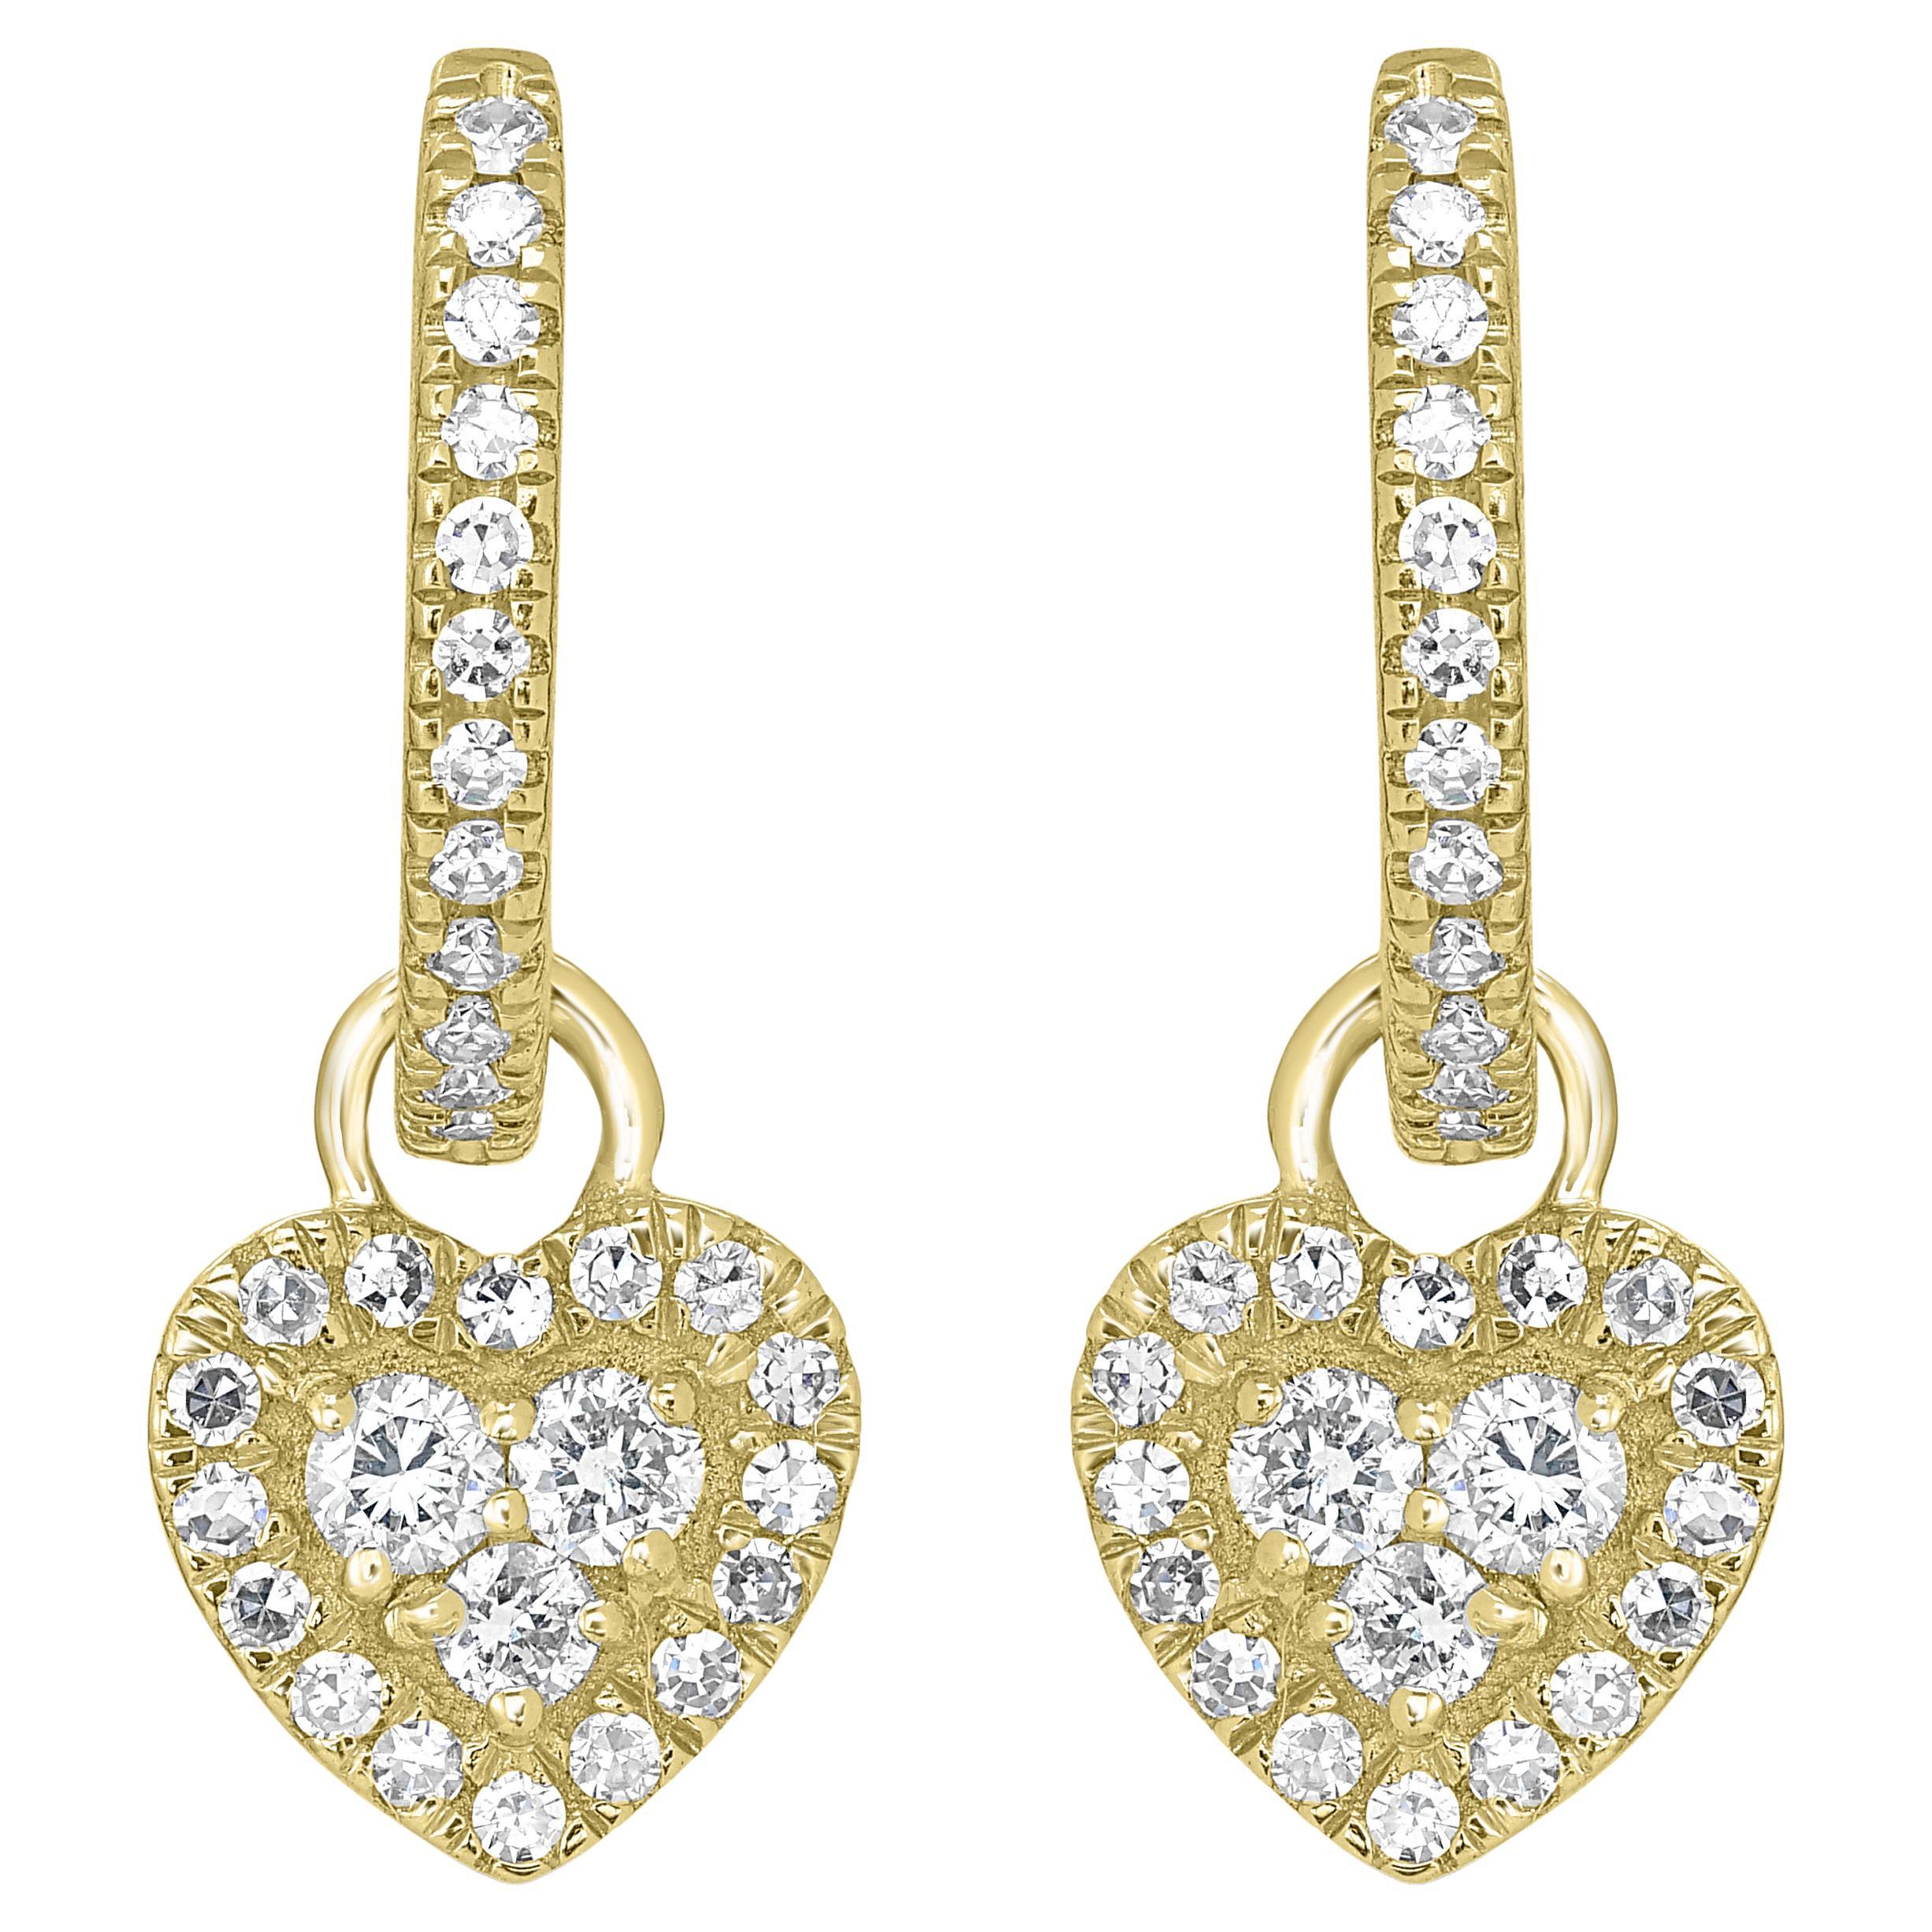 Make a beautiful statement with these Luxle heart hoop drop earrings made of 14k yellow gold and genuine diamonds. The epitome of the heart motif is a piece that is set with diamonds. These lobe-hugging earrings feature a charming heart drop that